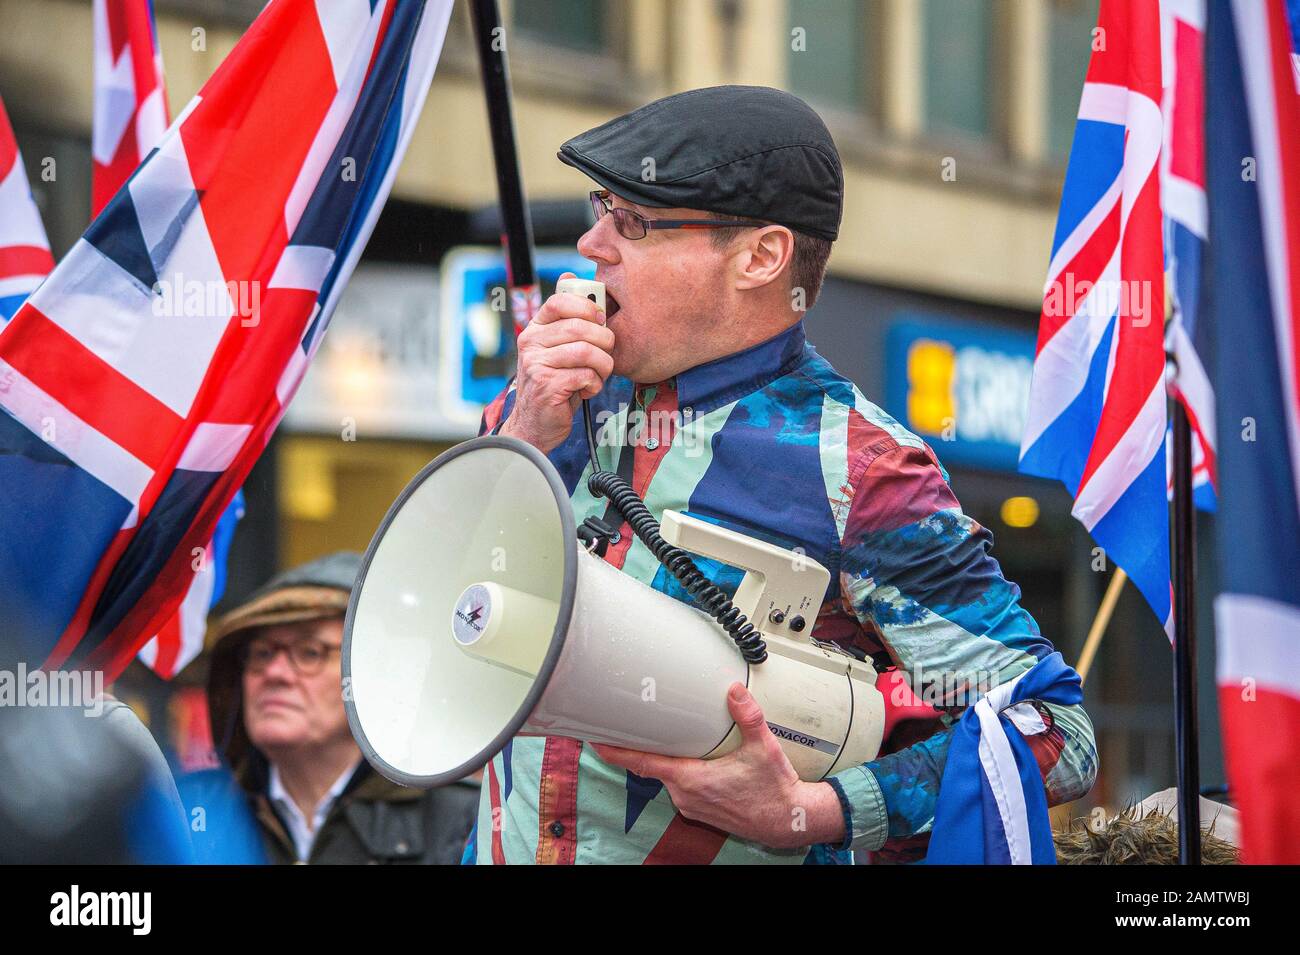 Glasgow, UK. 11th Jan, 2020. Pro-Unionist group leader Alistair McConnachie is seen shouting over his megaphone during the counter-protest.80,000 supporters came out in support of Scottish Independence following the UK General Election and the upcoming date of January 31st when the UK will leave the European Union, dragging Scotland out of it against its will, as a result the group All Under One Banner held an Emergency march through the center of Glasgow to protest against both London rule and Brexit. Credit: SOPA Images Limited/Alamy Live News Stock Photo